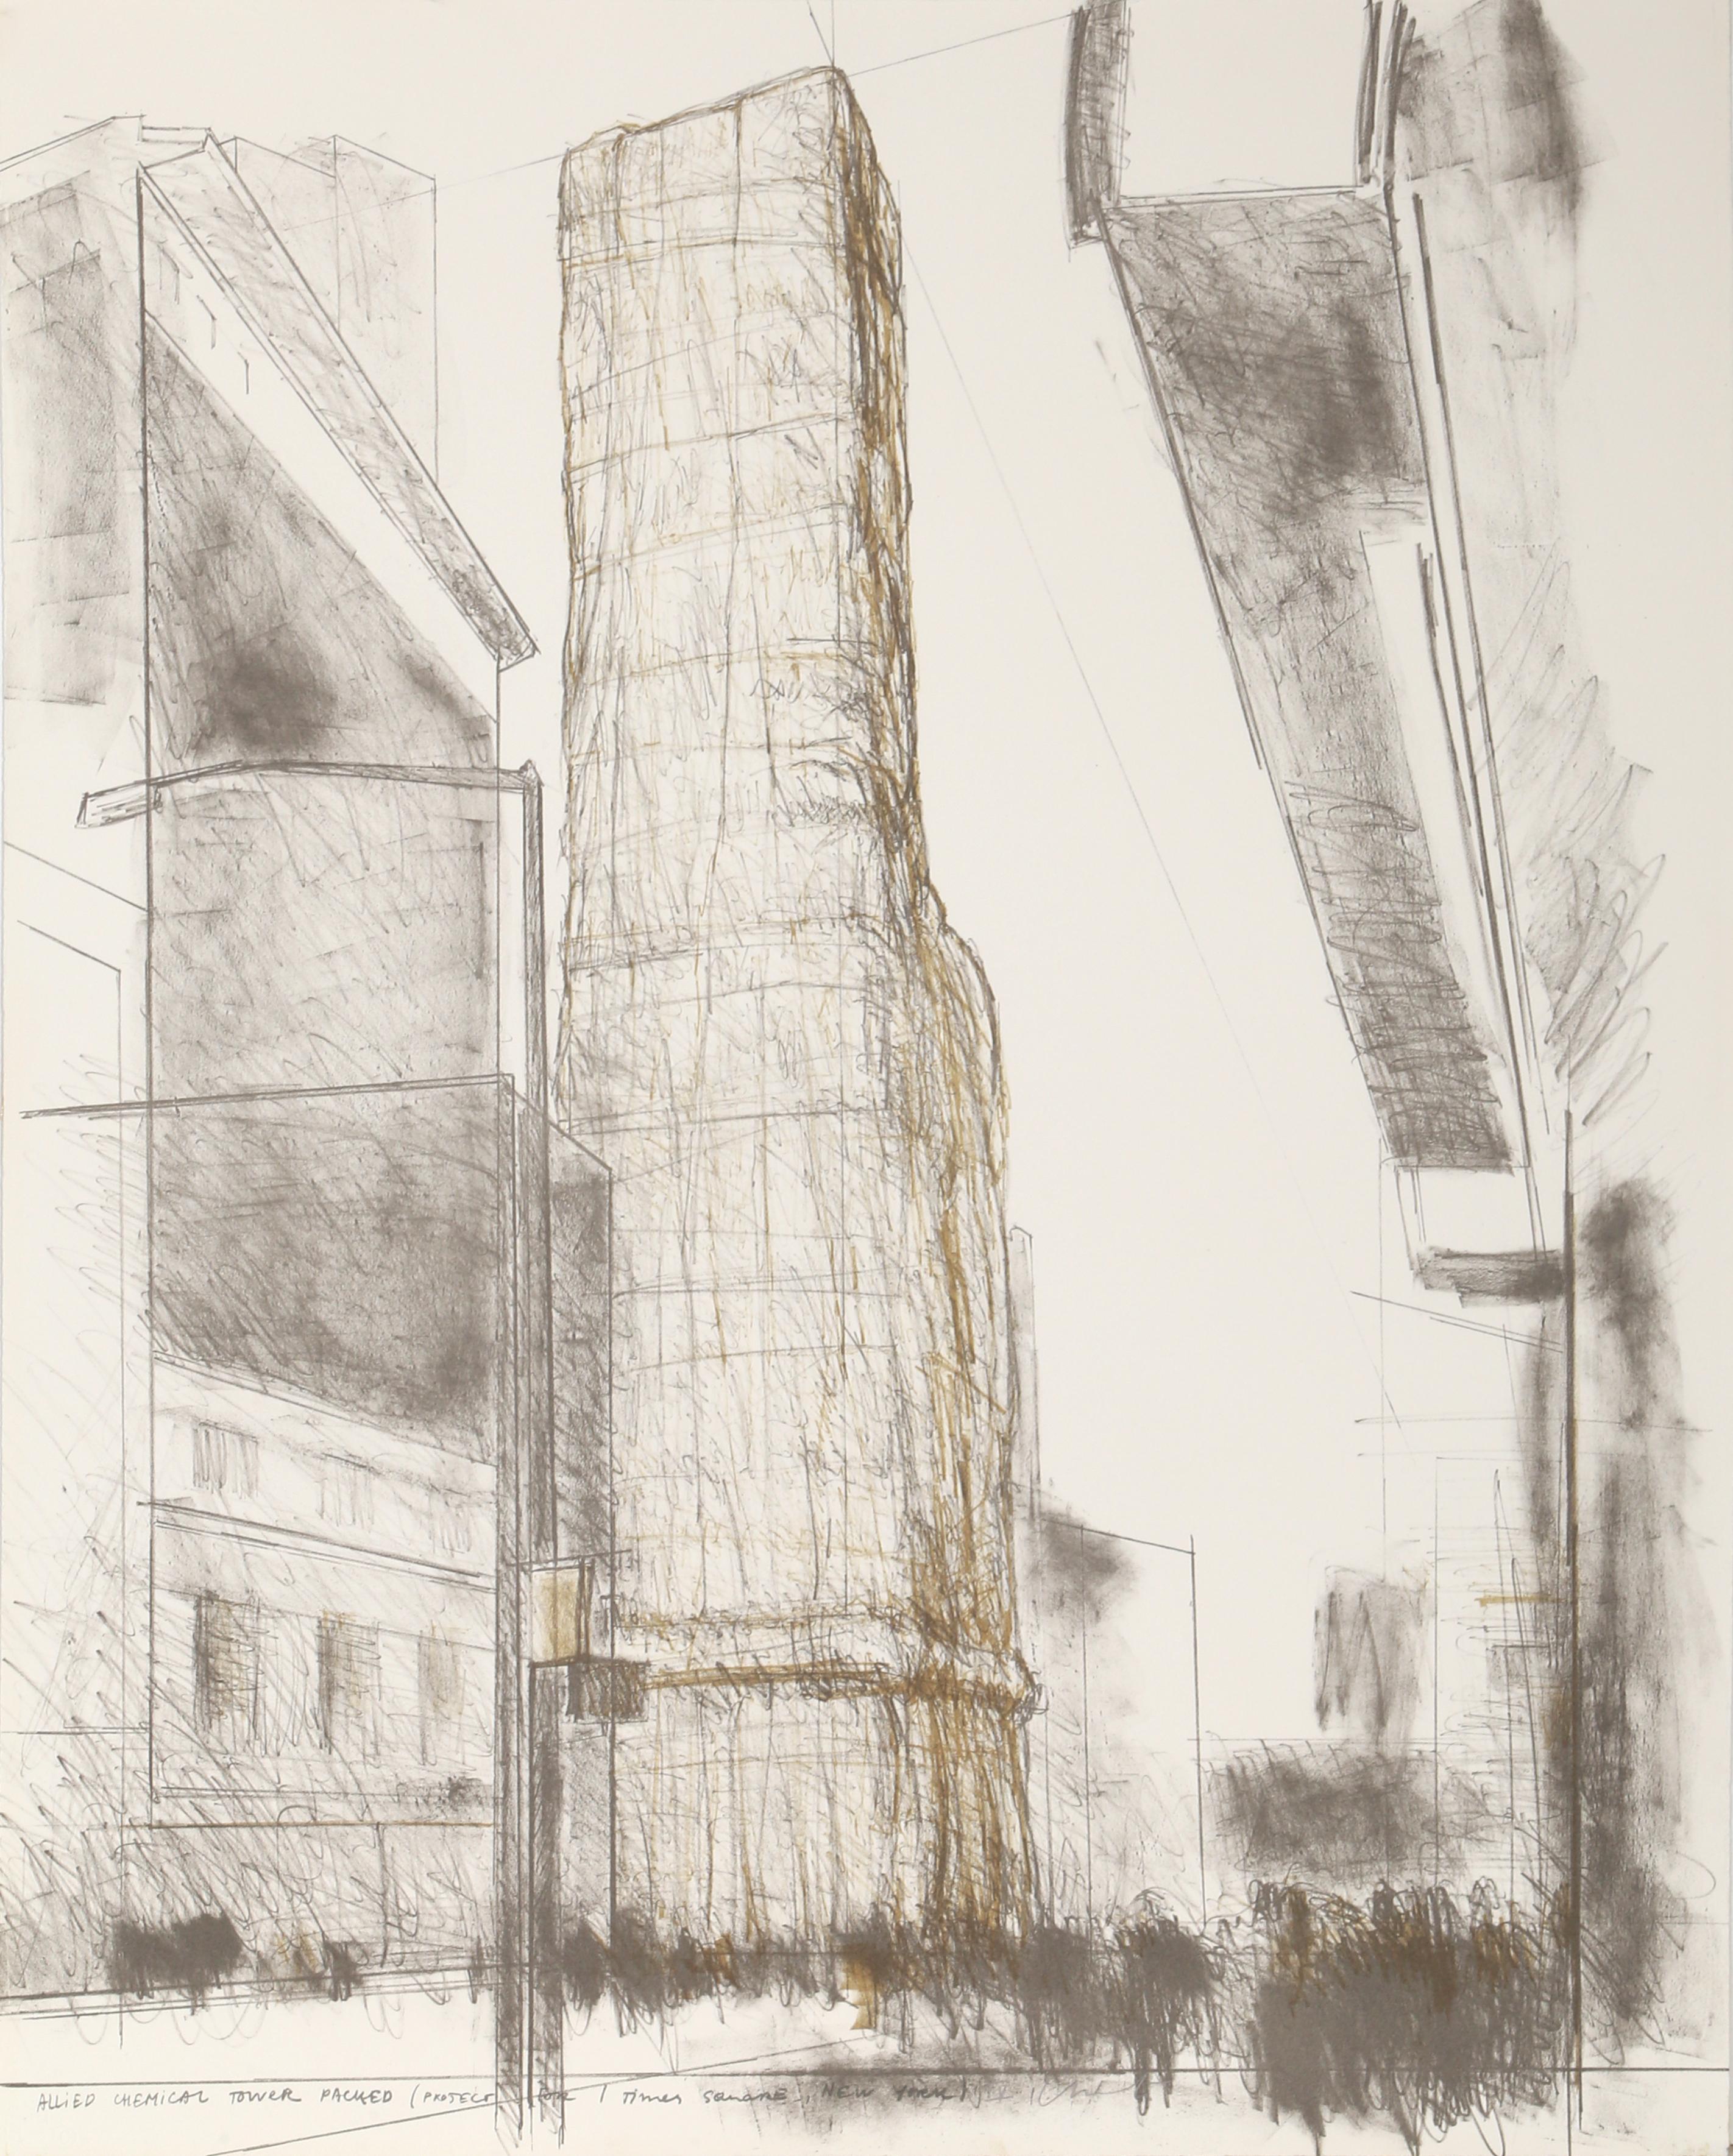 Allied Chemical Tower, Packed, Project for 1 Times Square - Print by Christo and Jeanne-Claude